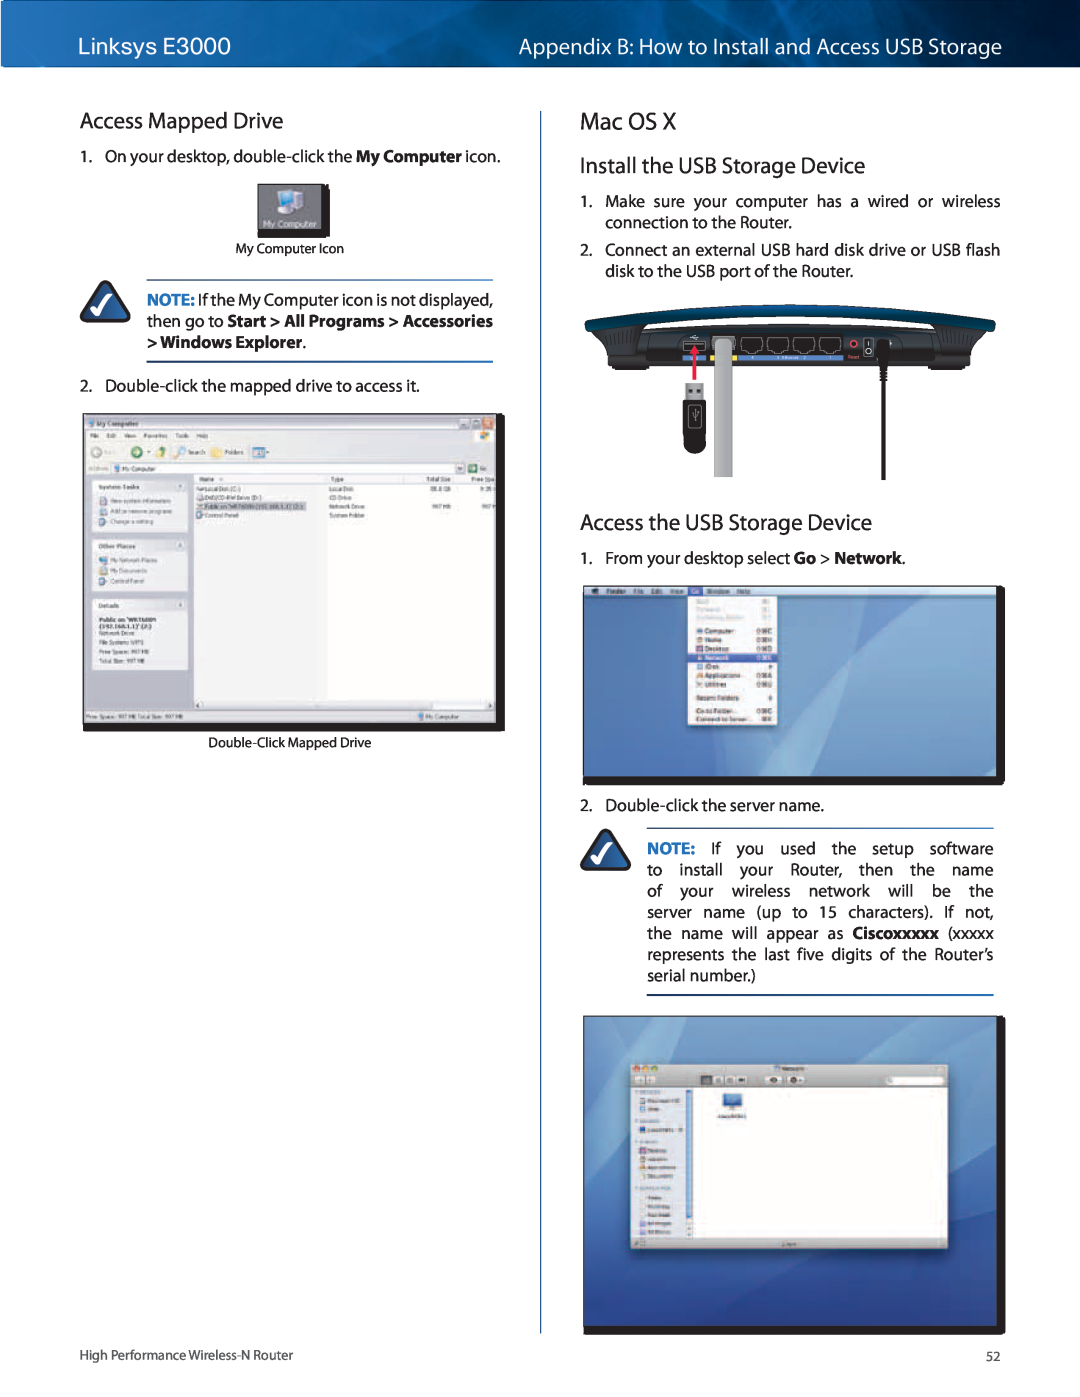 Linksys Mac OS, Linksys E3000, Appendix B How to Install and Access USB Storage, Access Mapped Drive, Windows Explorer 